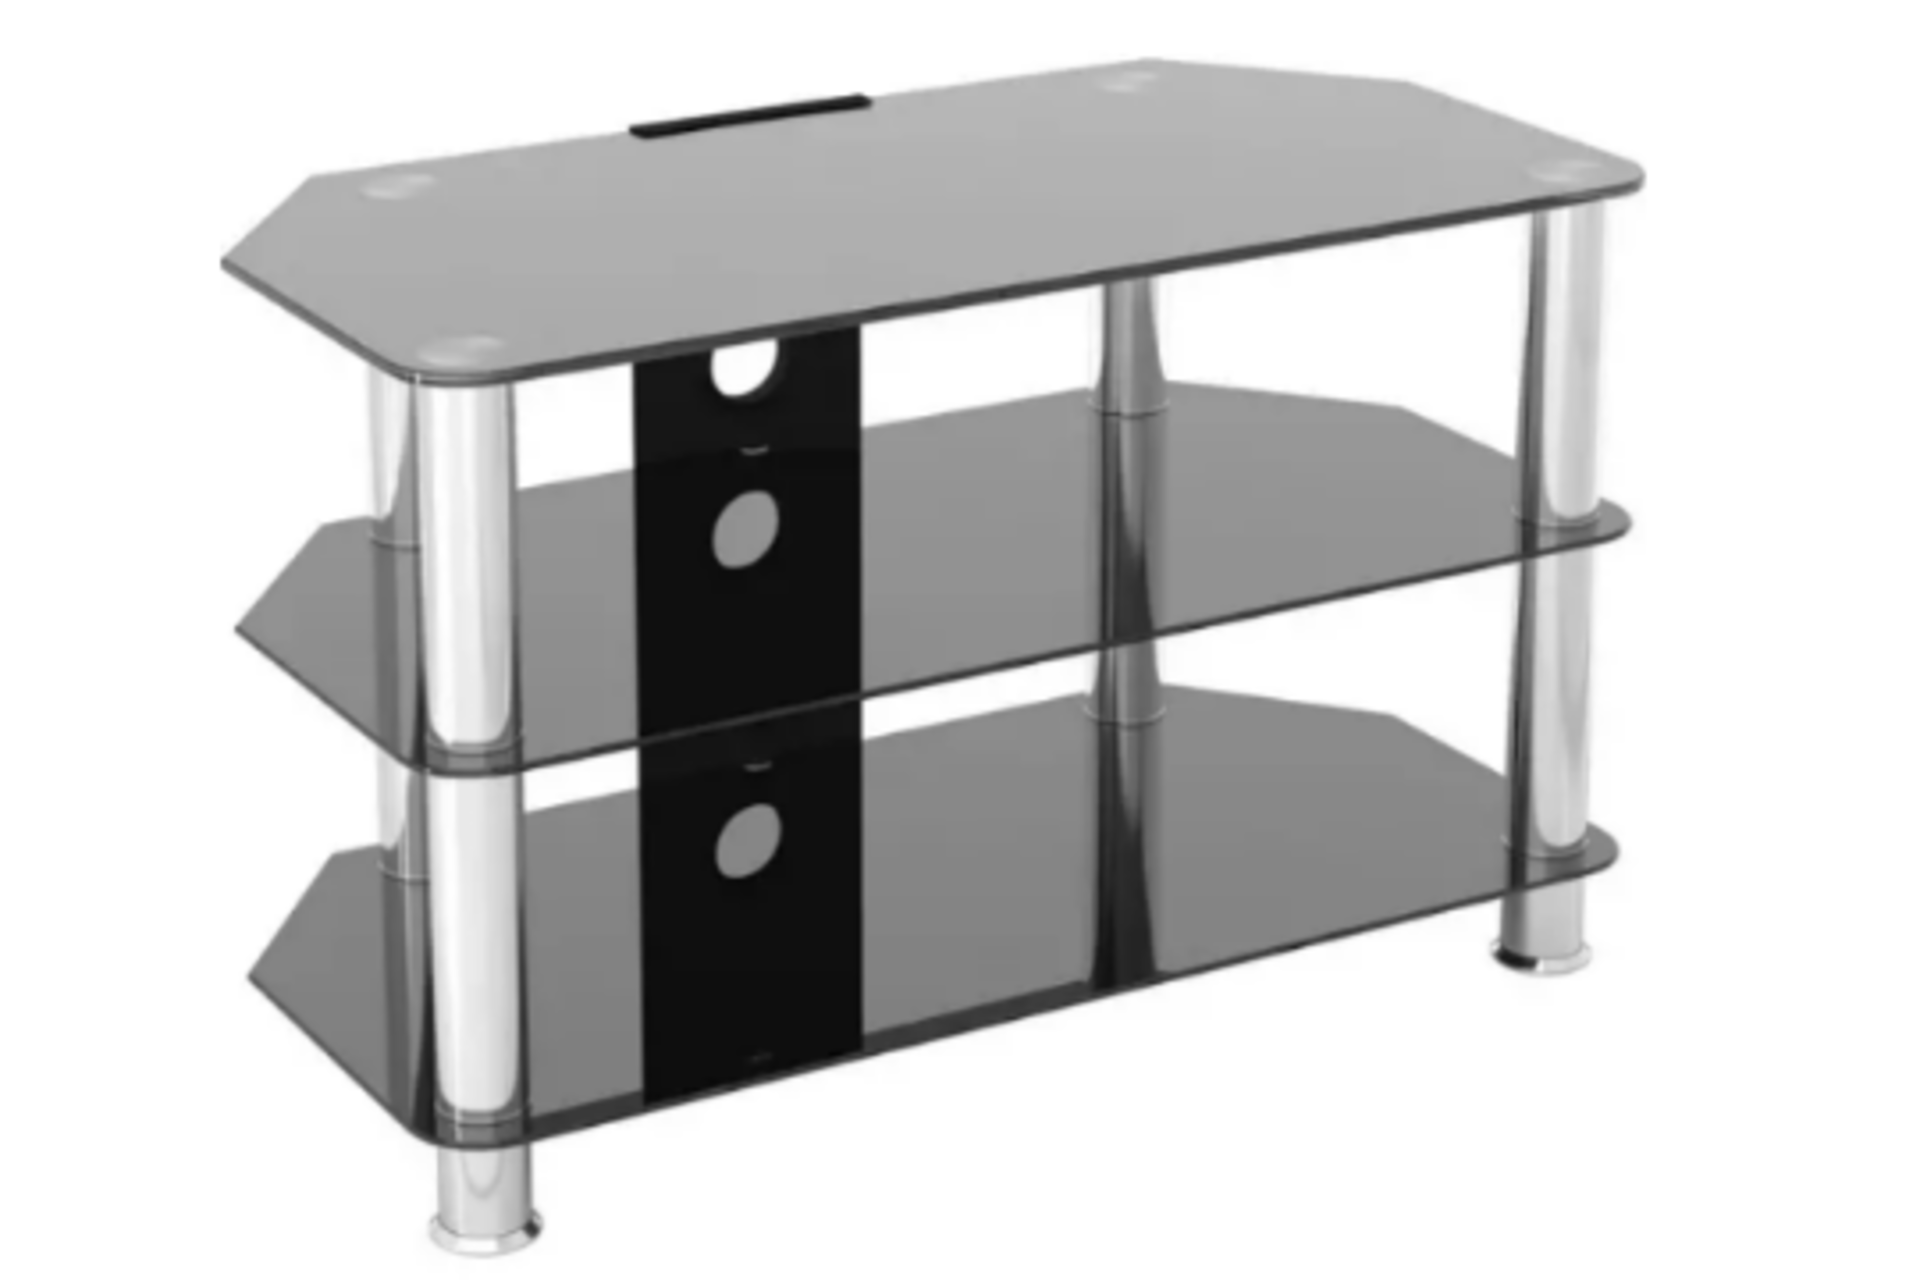 TRADE LOT 10 x NEW LIVING GLASS TV STANDS. BLACK TEMPERED GLASS WITH STAINLESS STEEL LEGS. EASY TO - Image 4 of 5